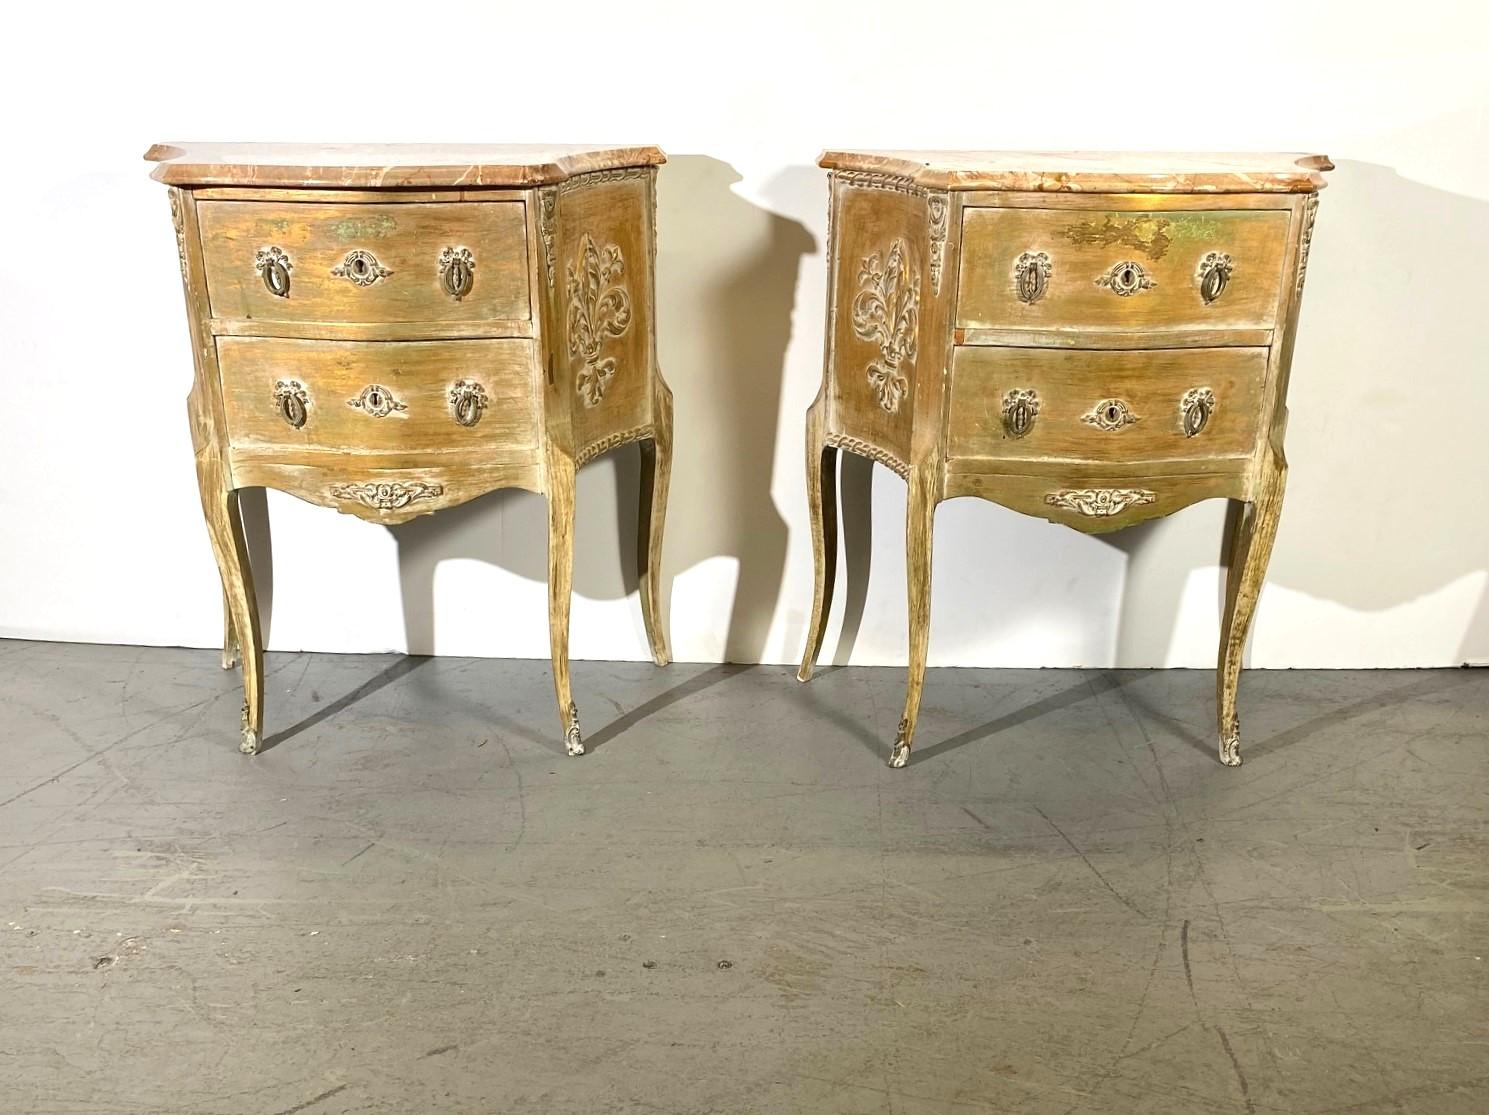 Italian Louis xv style marble top nightstands. Two drawers with brass pulls.